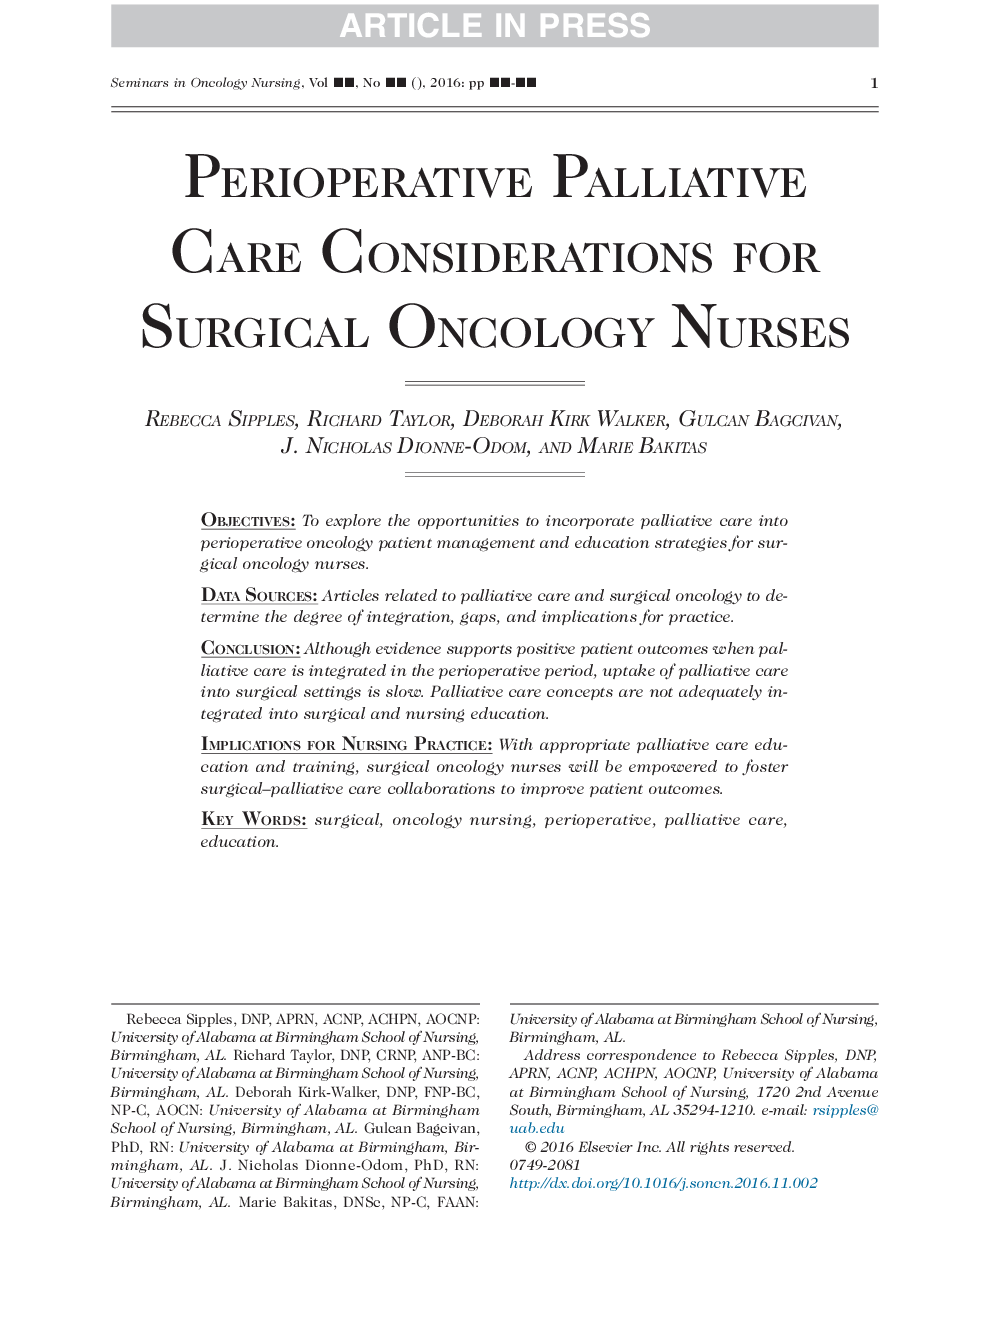 Perioperative Palliative Care Considerations for Surgical Oncology Nurses